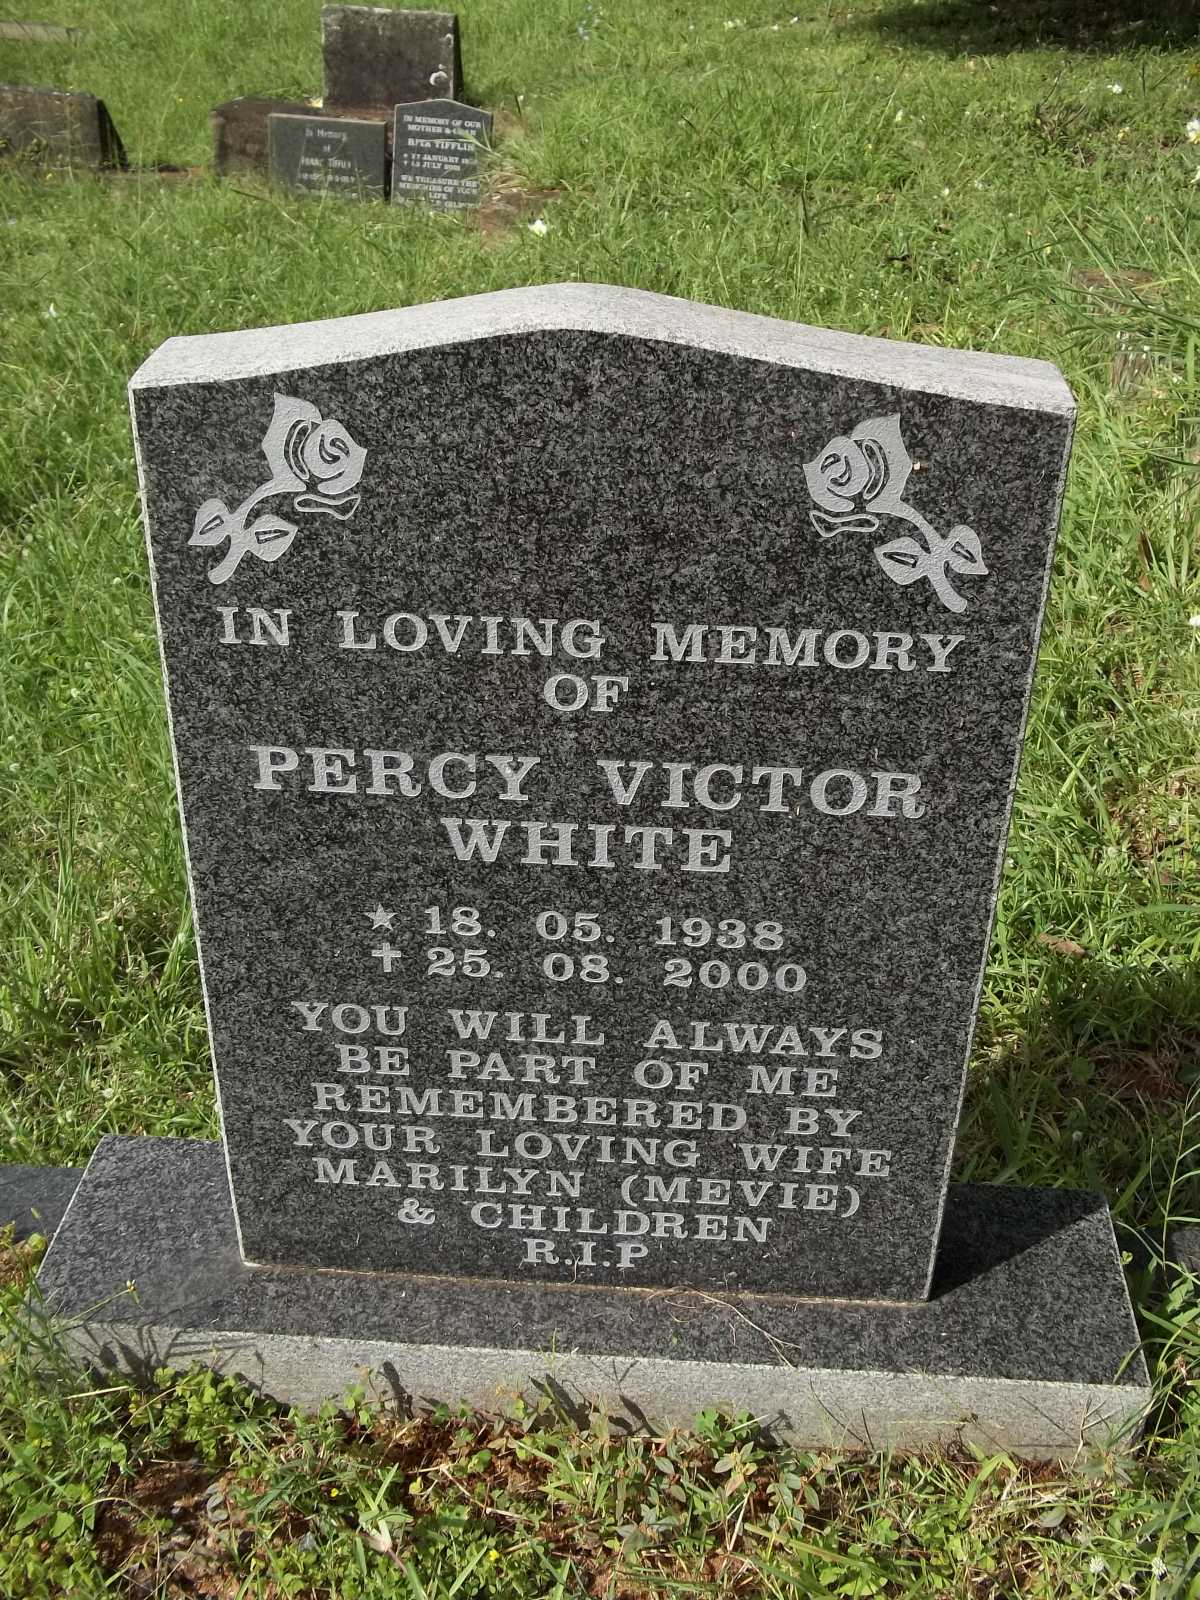 WHITE Percy Victor 1938-2000